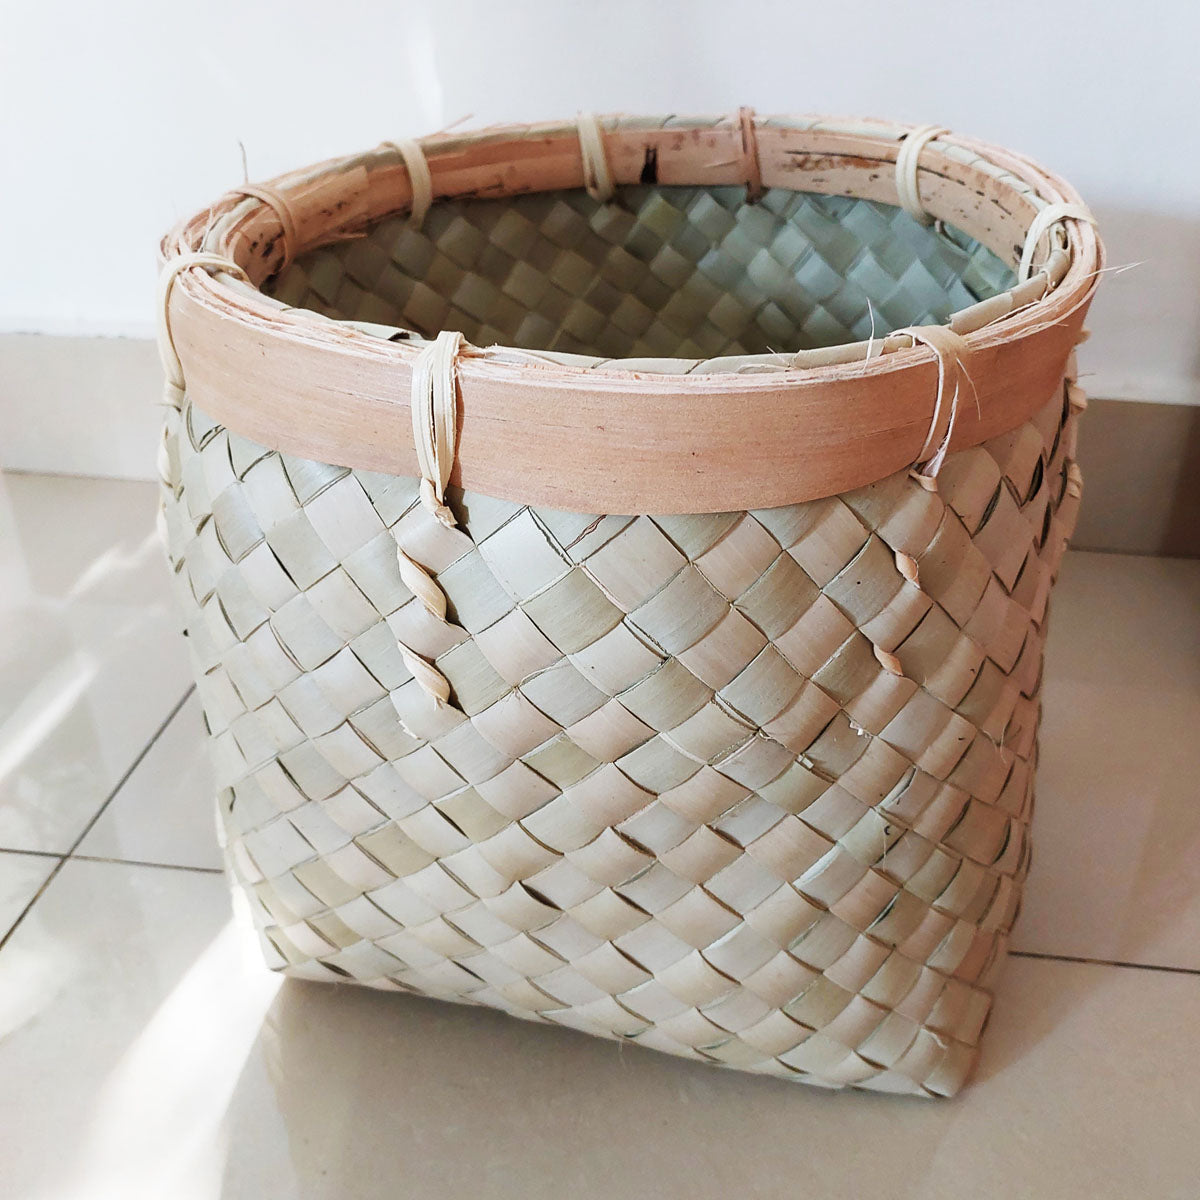 Potted Monstera Indoor plant in wicker/seagrass/straw basket